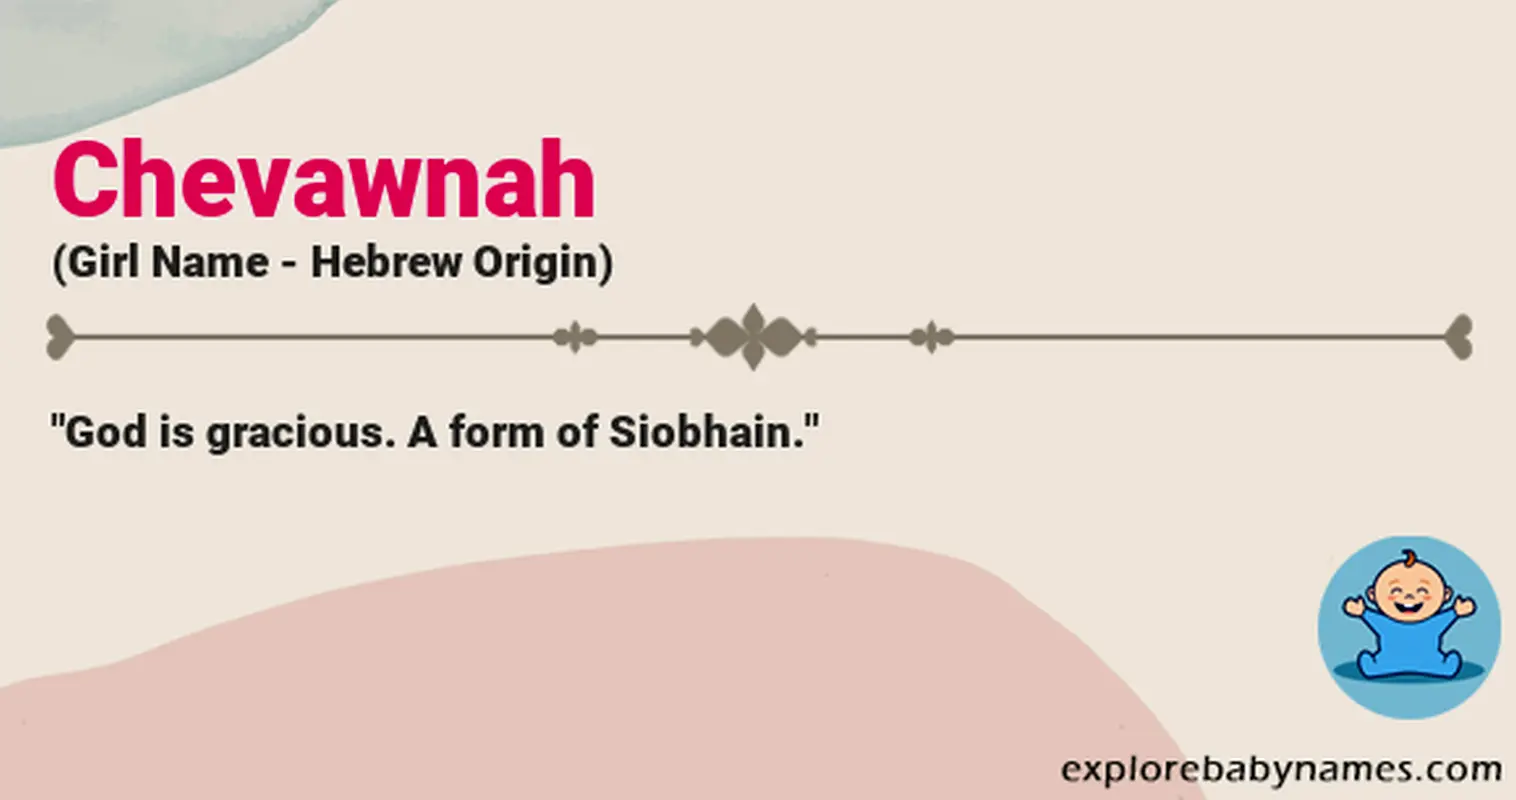 Meaning of Chevawnah